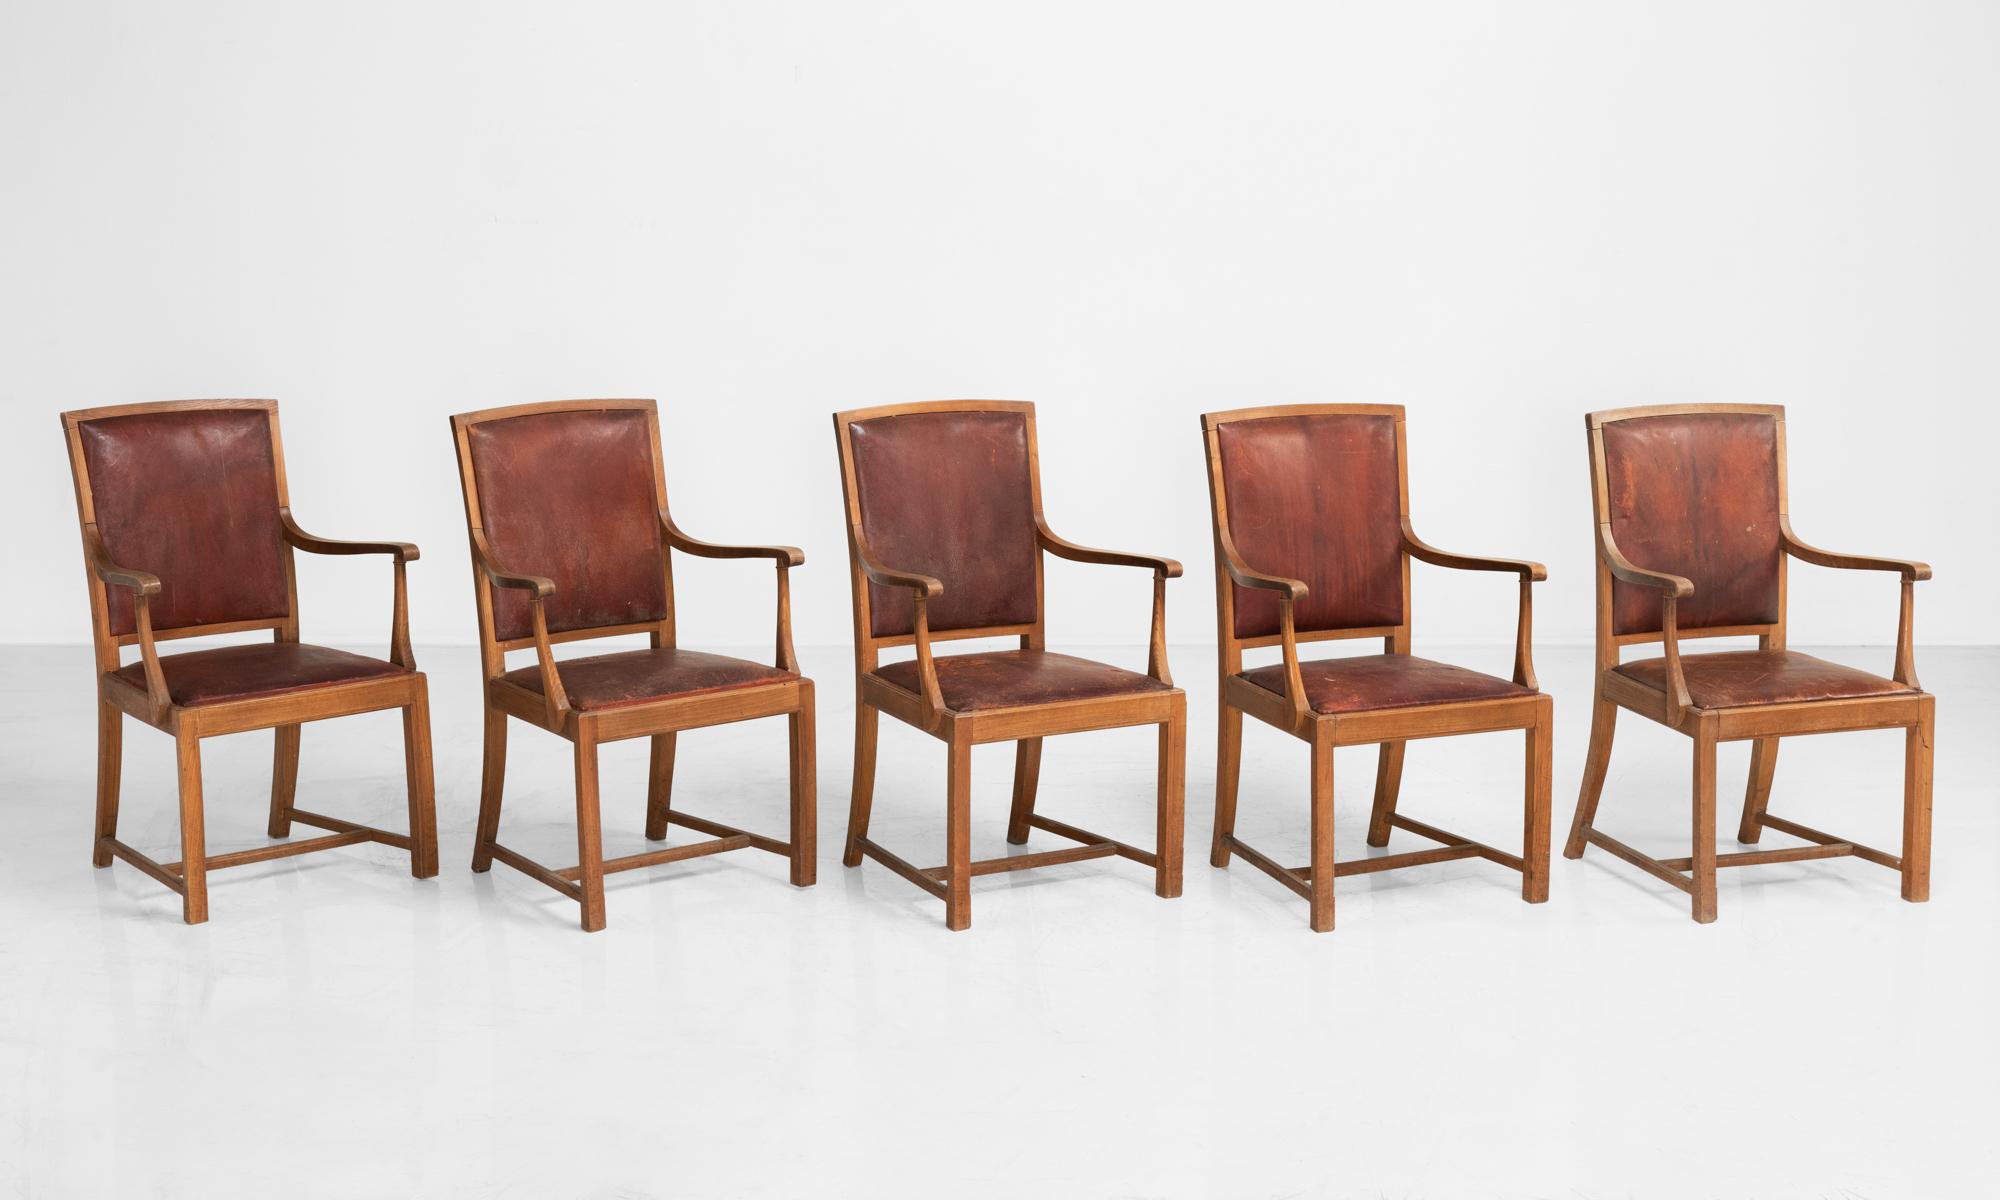 Carved oak and leather dining chairs, England, circa 1930.

Well-constructed armchairs with beautifully patinated leather backs and seat.